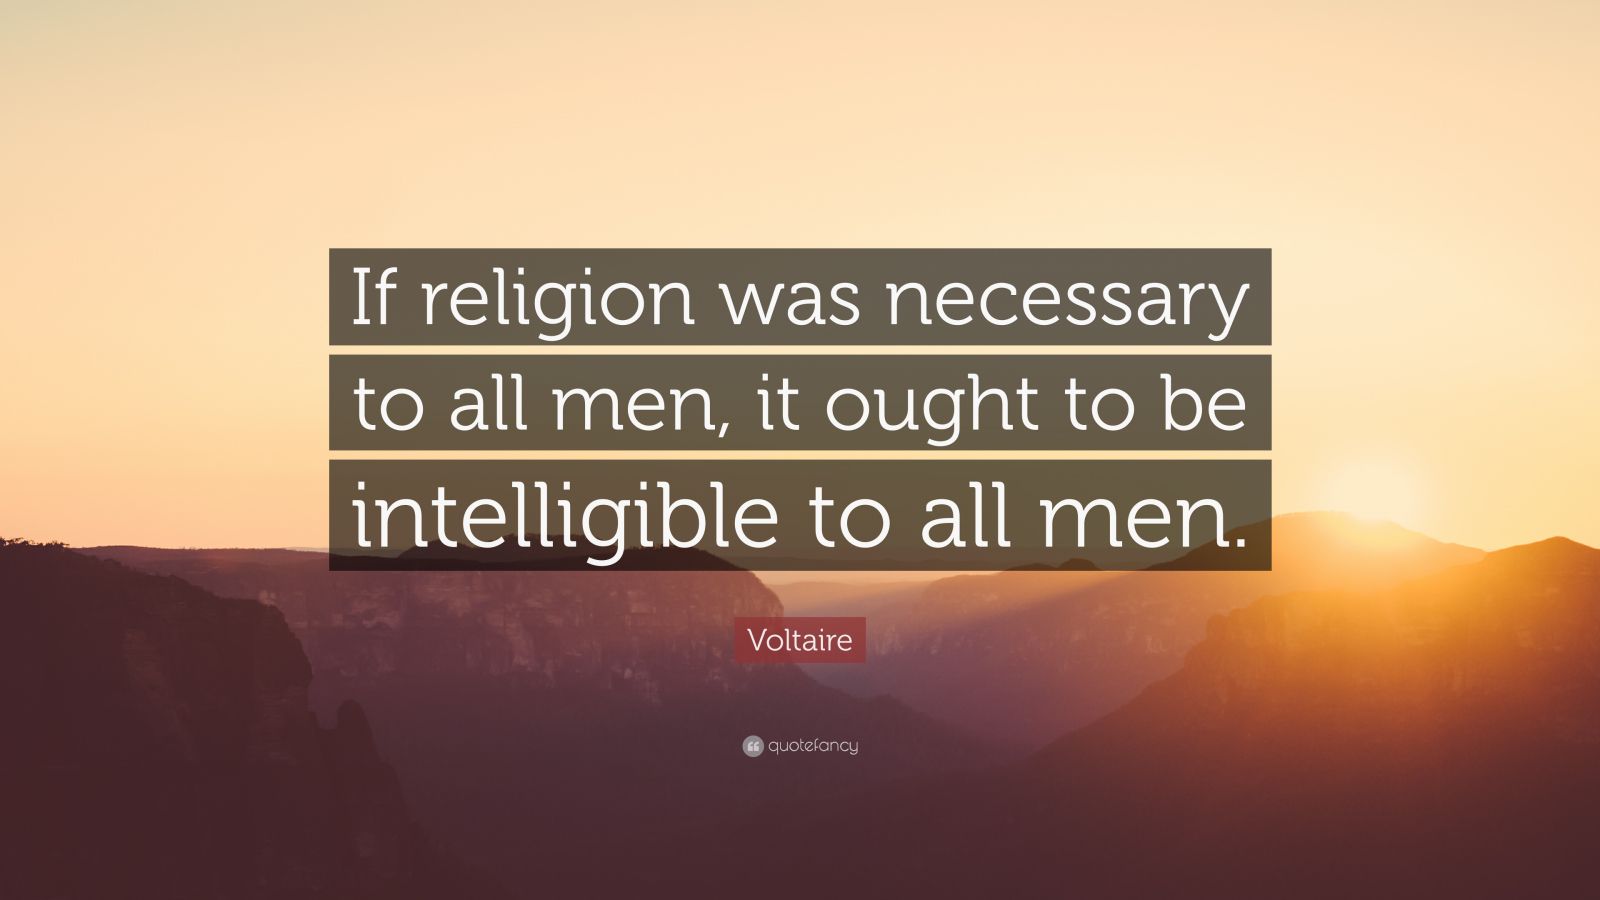 Voltaire Quote: “If religion was necessary to all men, it ought to be ...